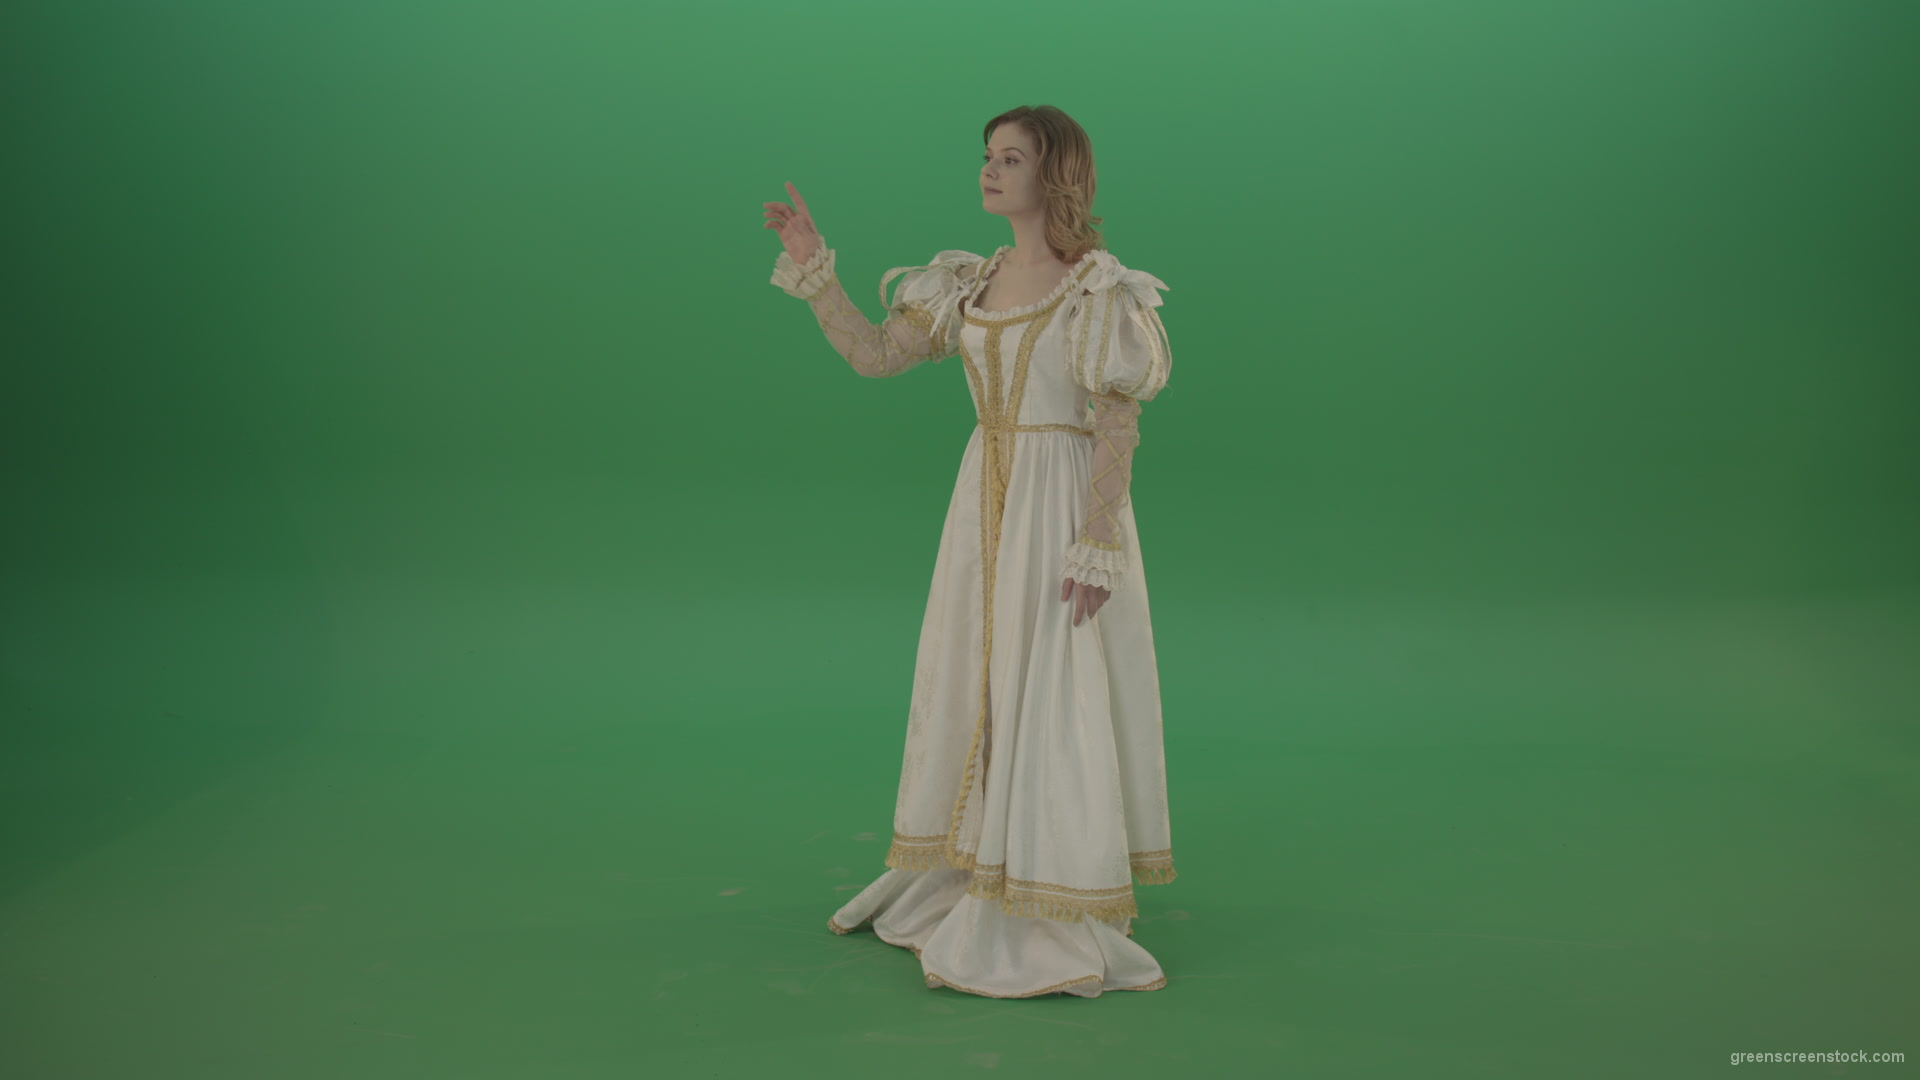 Finding-a-girl-on-the-touch-screen-is-looking-at-the-photo-with-pleasure-isolated-on-green-screen_002 Green Screen Stock